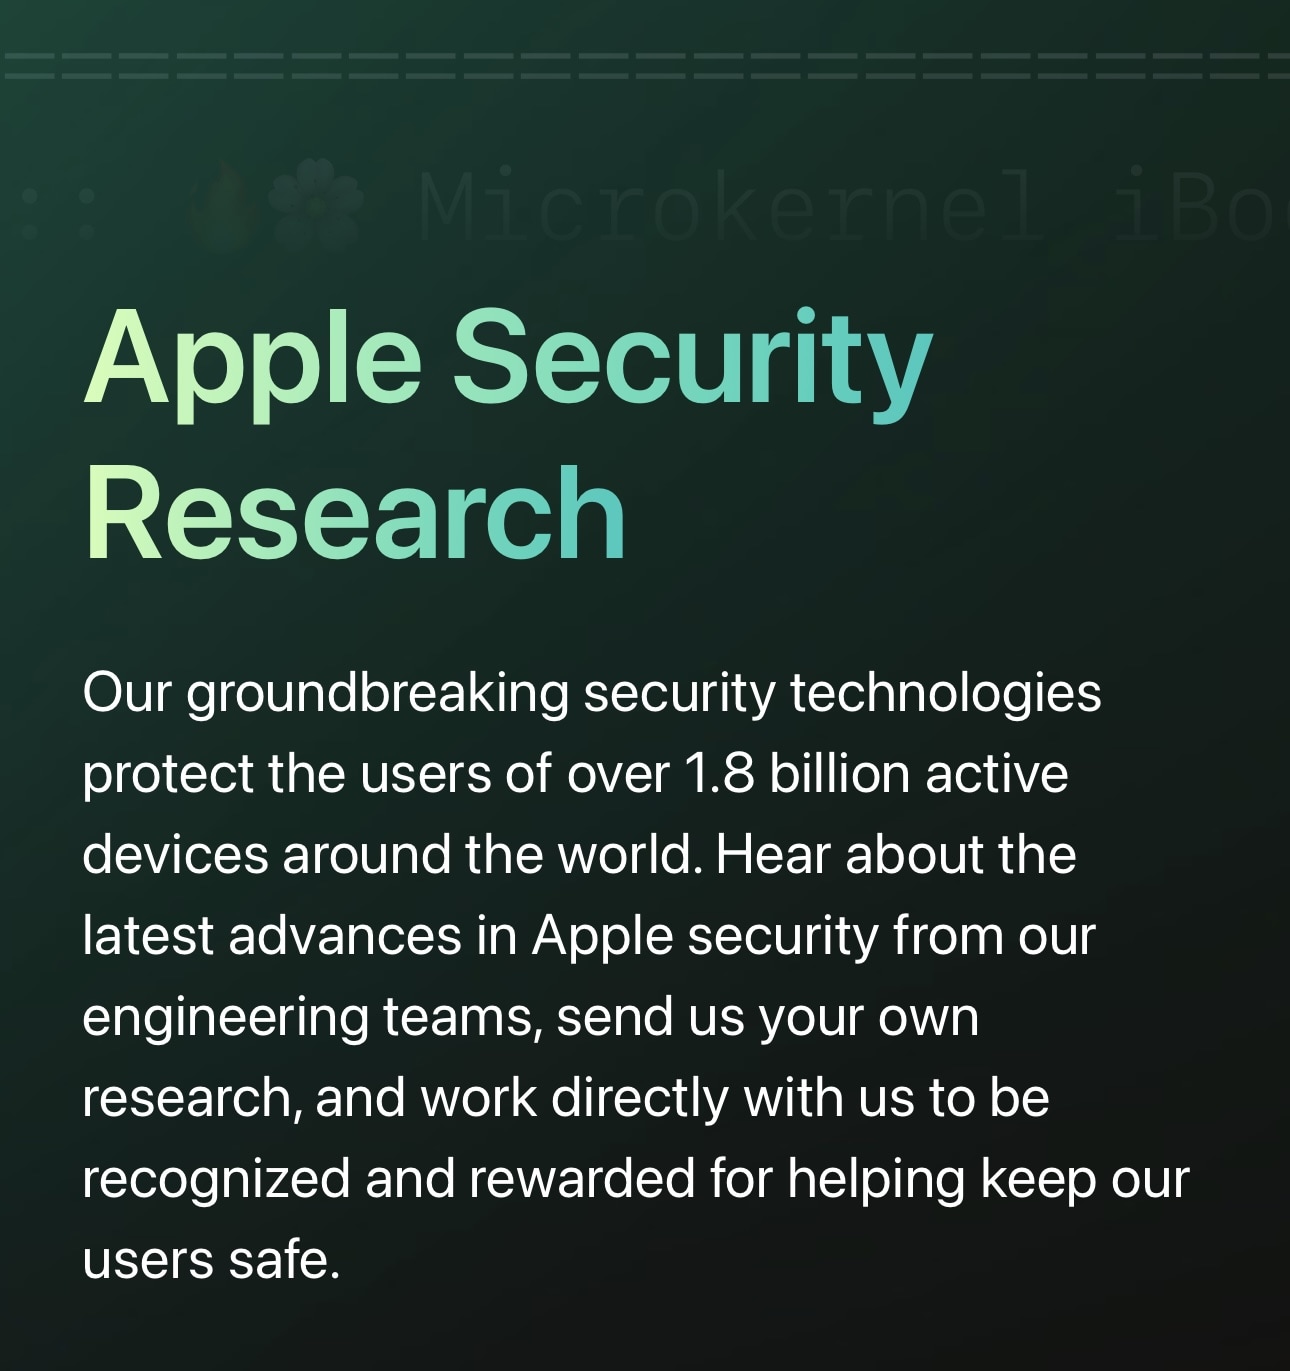 Apple Security Research website redesigned for 2022.